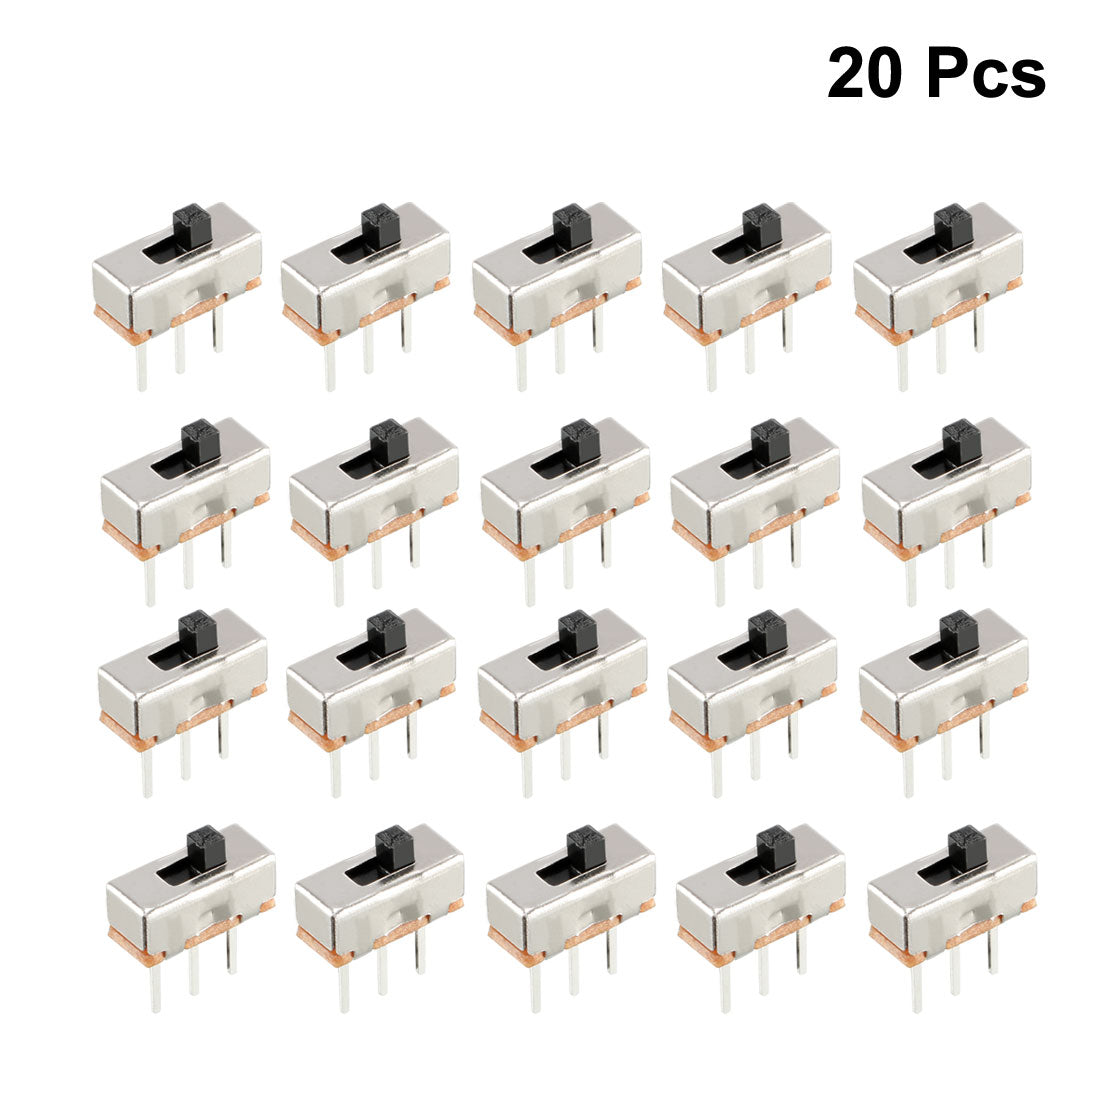 uxcell Uxcell 20Pcs 2mm Vertical Slide Switch SPDT 1P2T 3 Terminals PCB Panel Latching